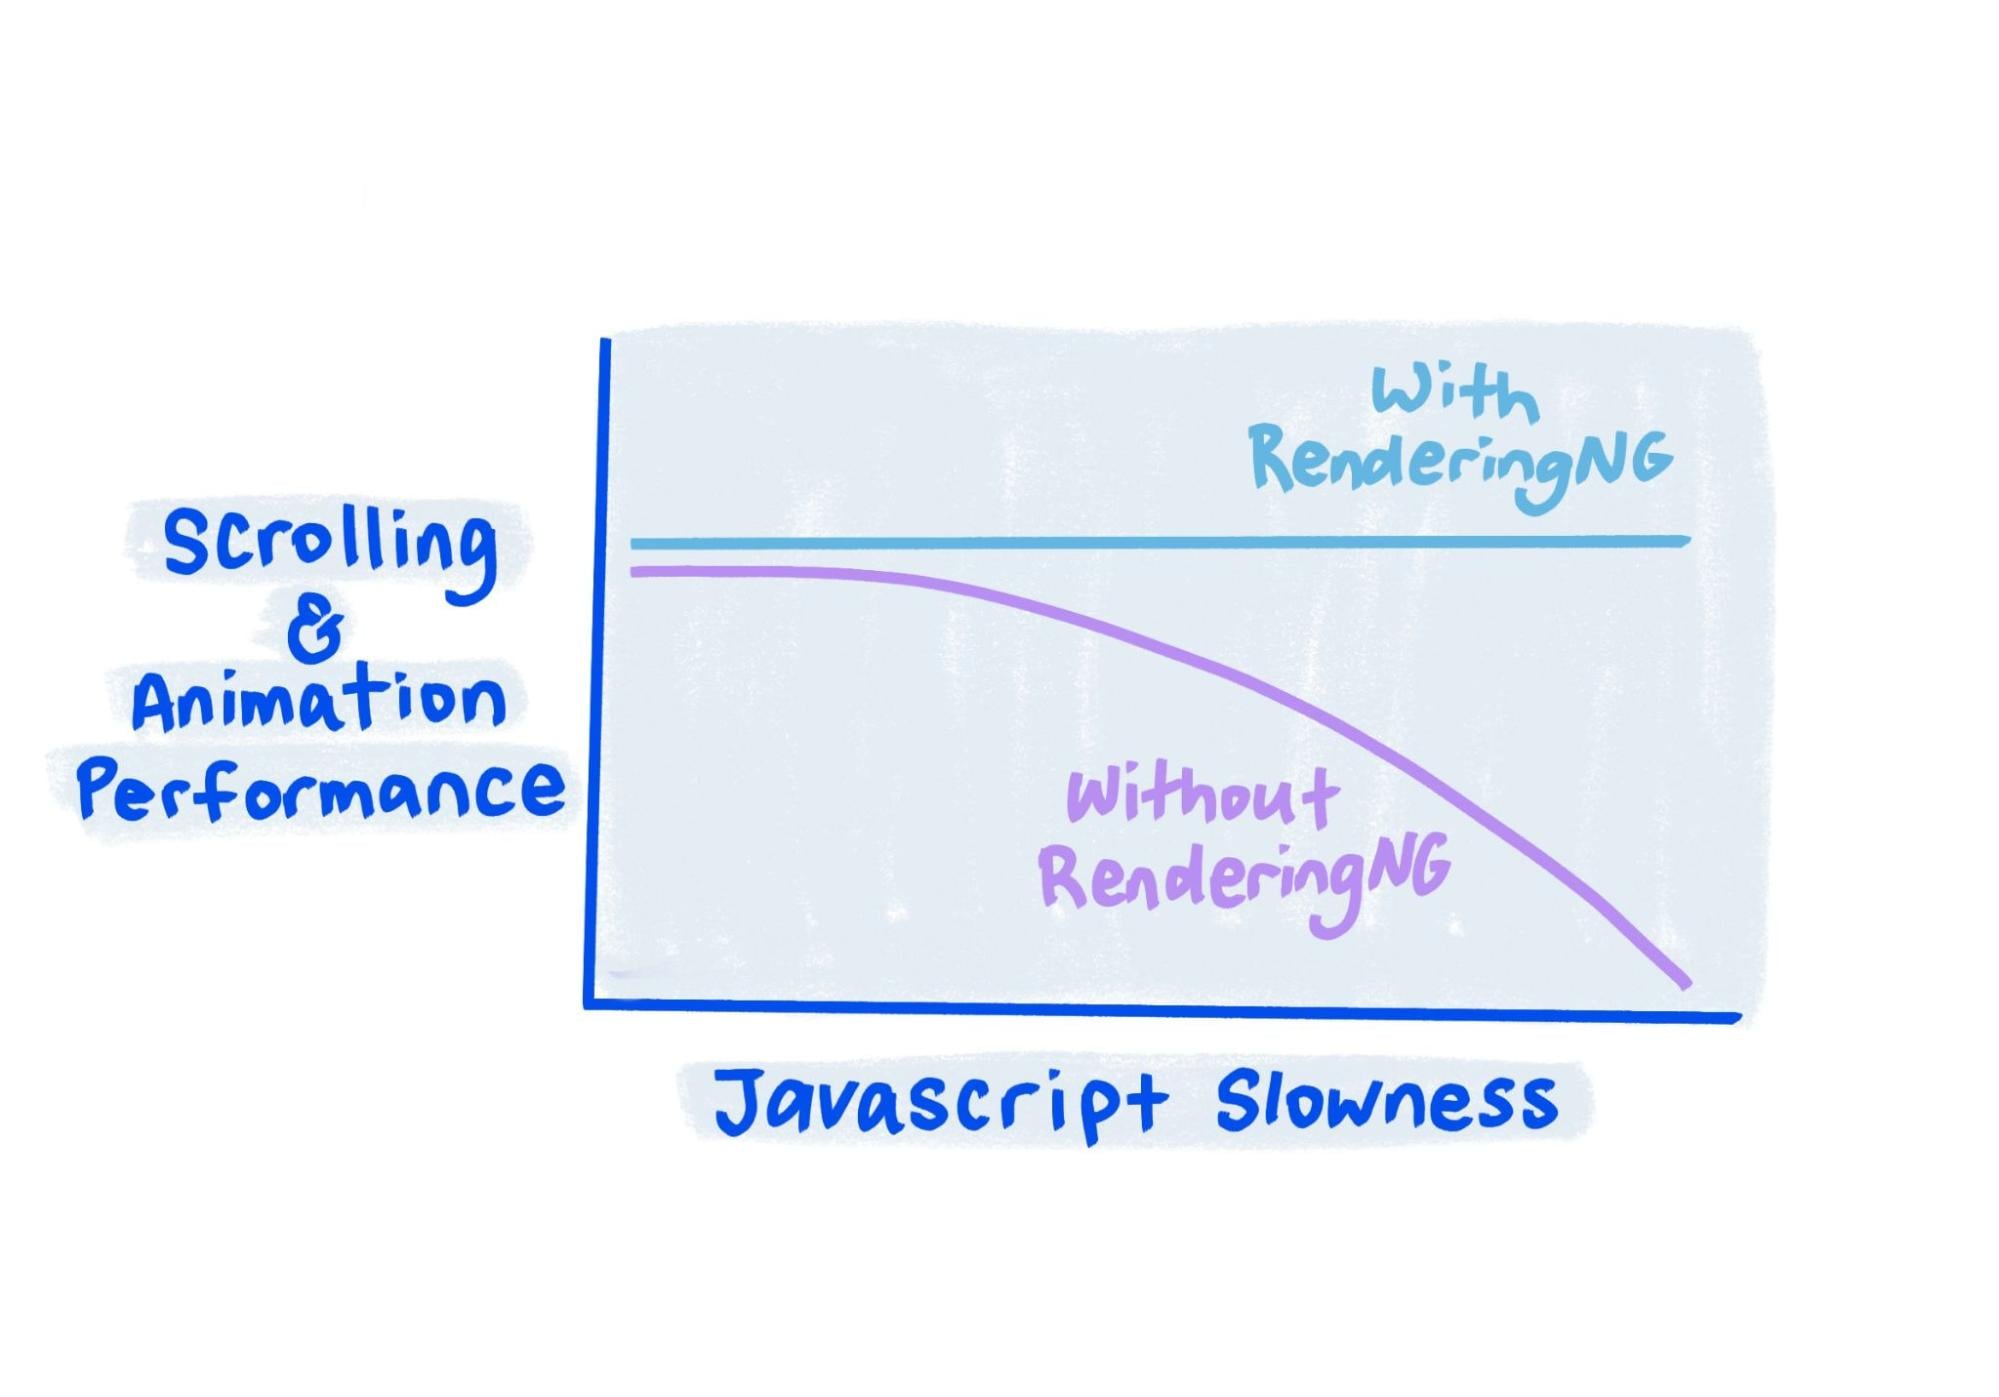 Sketch shows that with RenderingNG performance stays solid even when JavaScript is very slow.